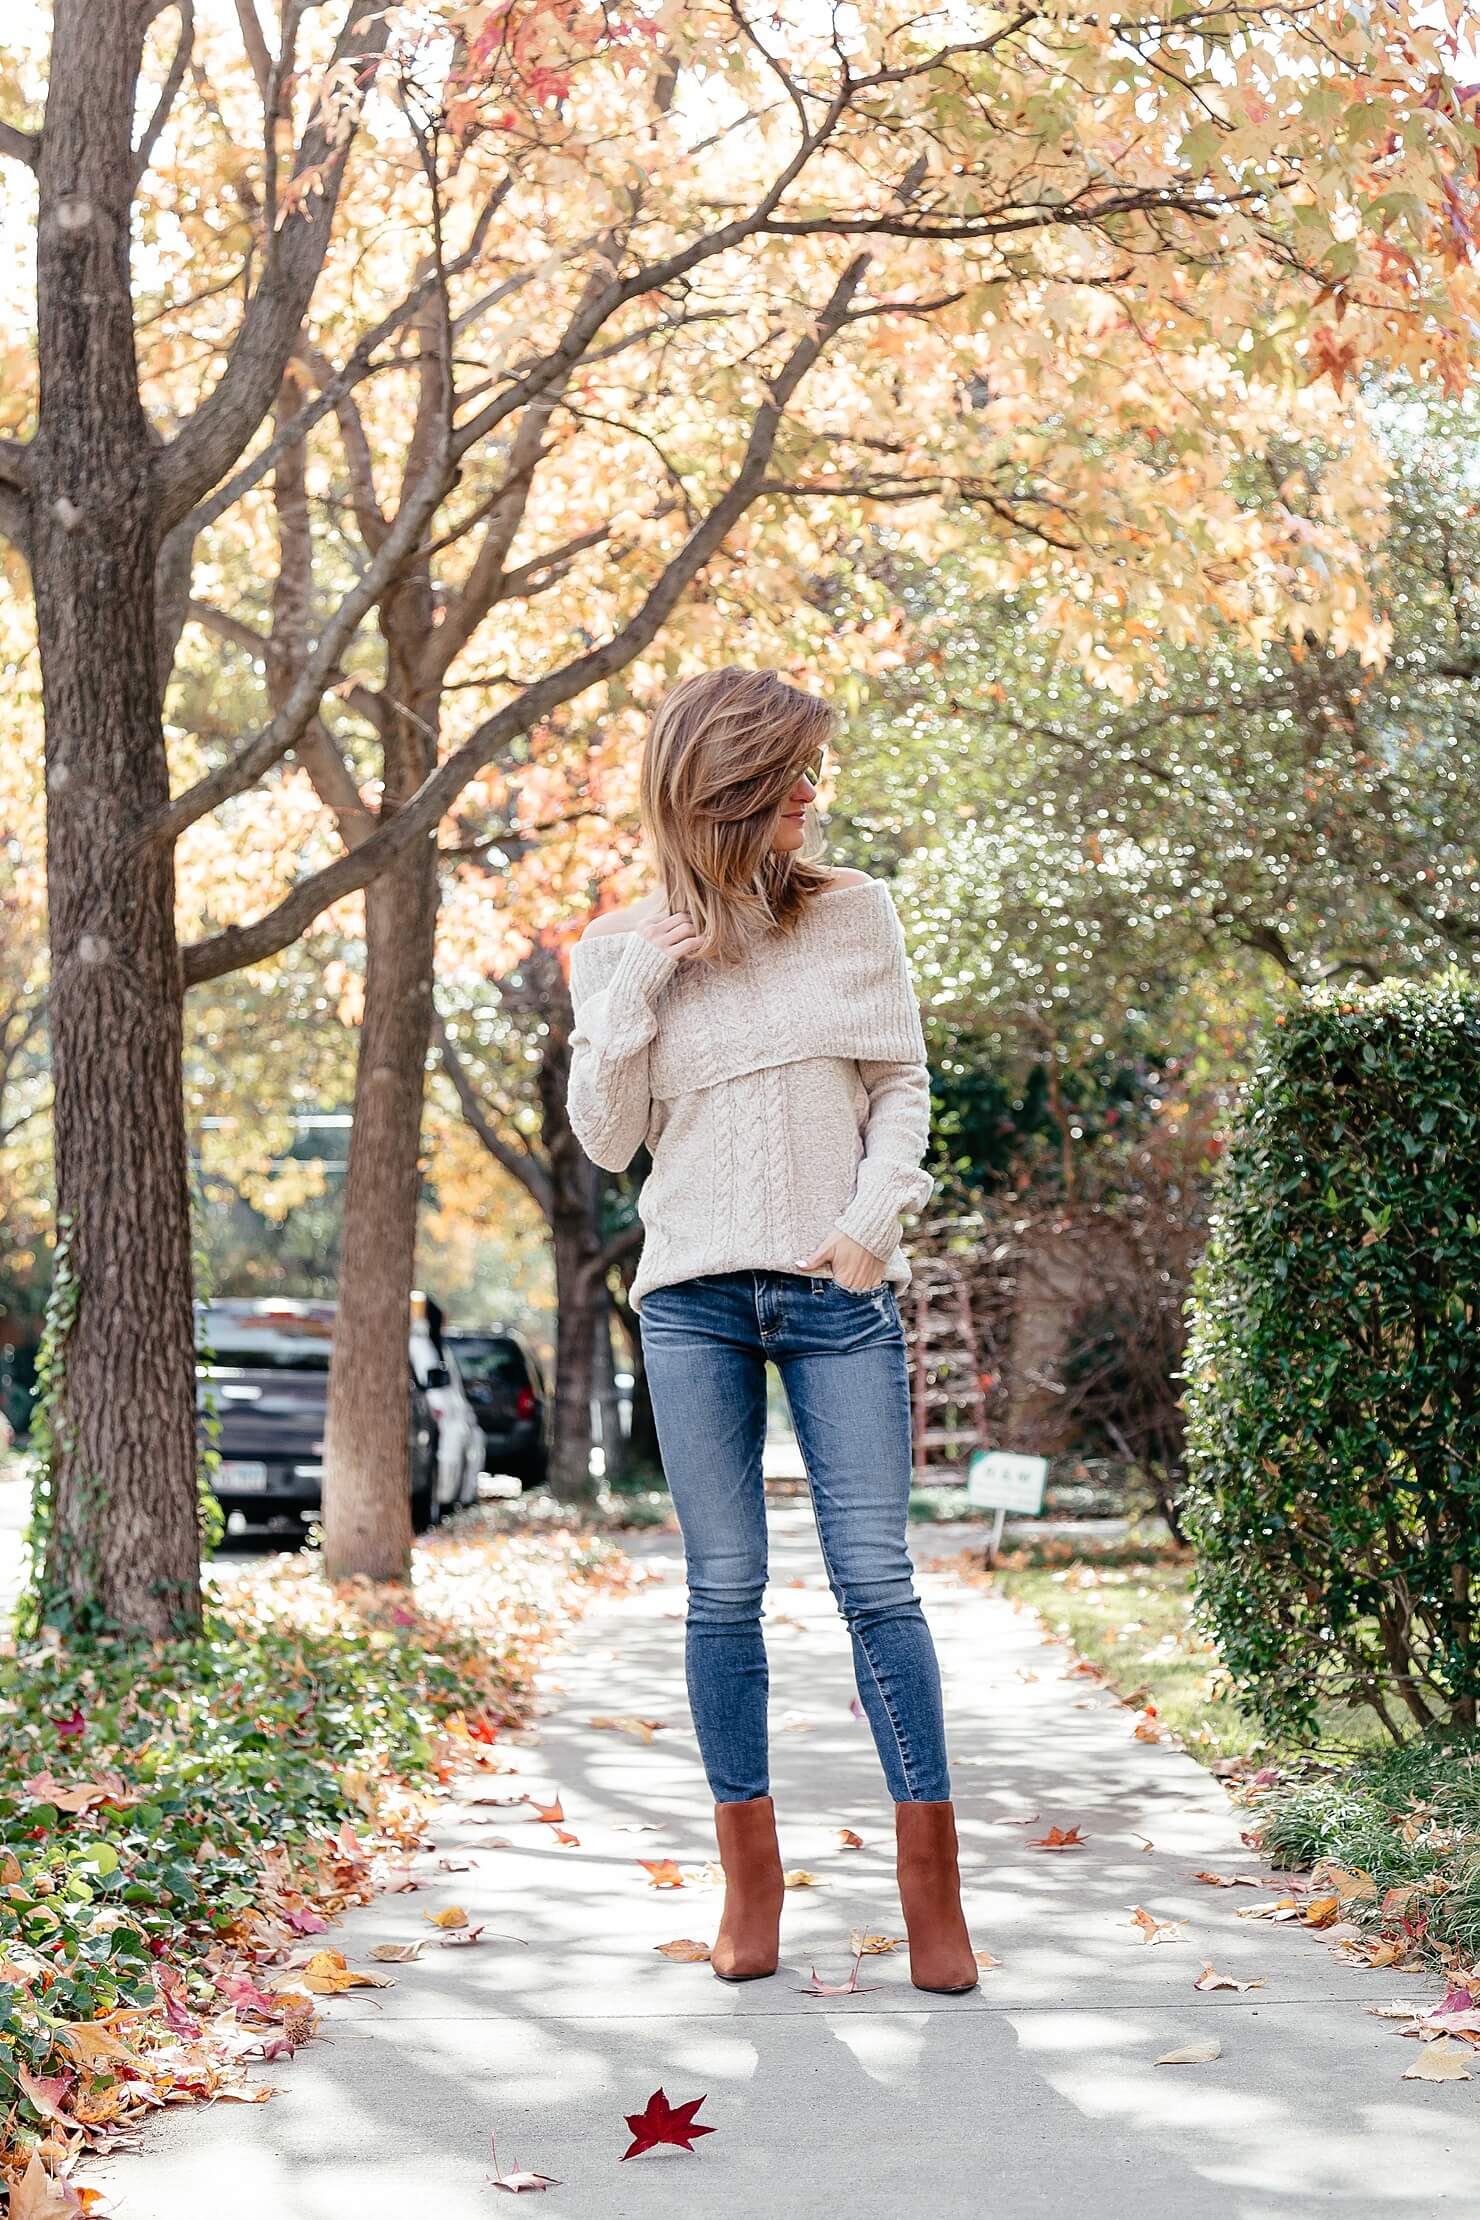 off the shoulder cable knit sweater, ag jeans, and brown heel booties